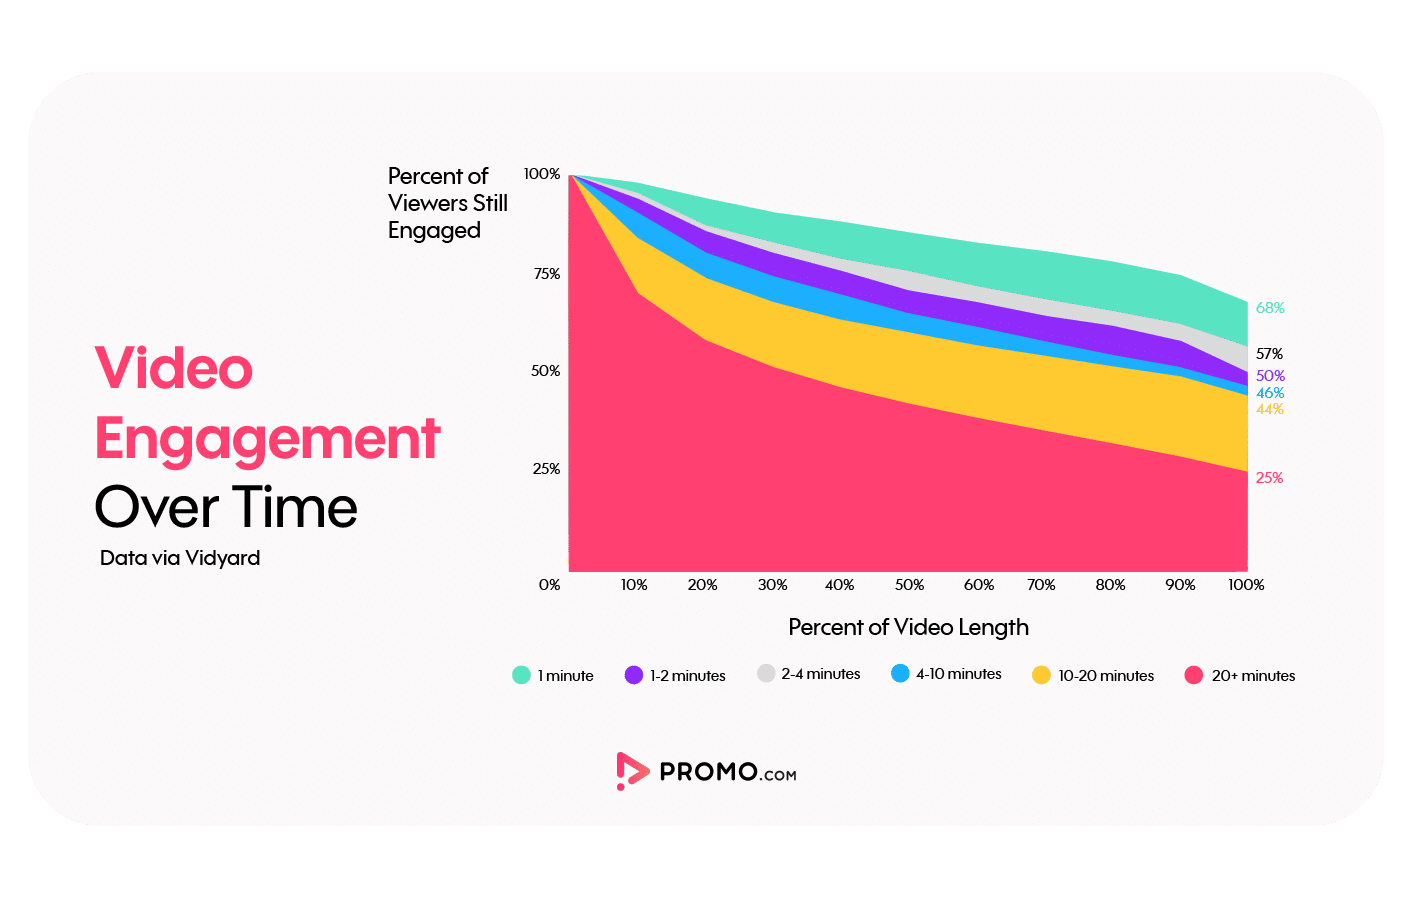 Video Engagement Over Time by Video Length